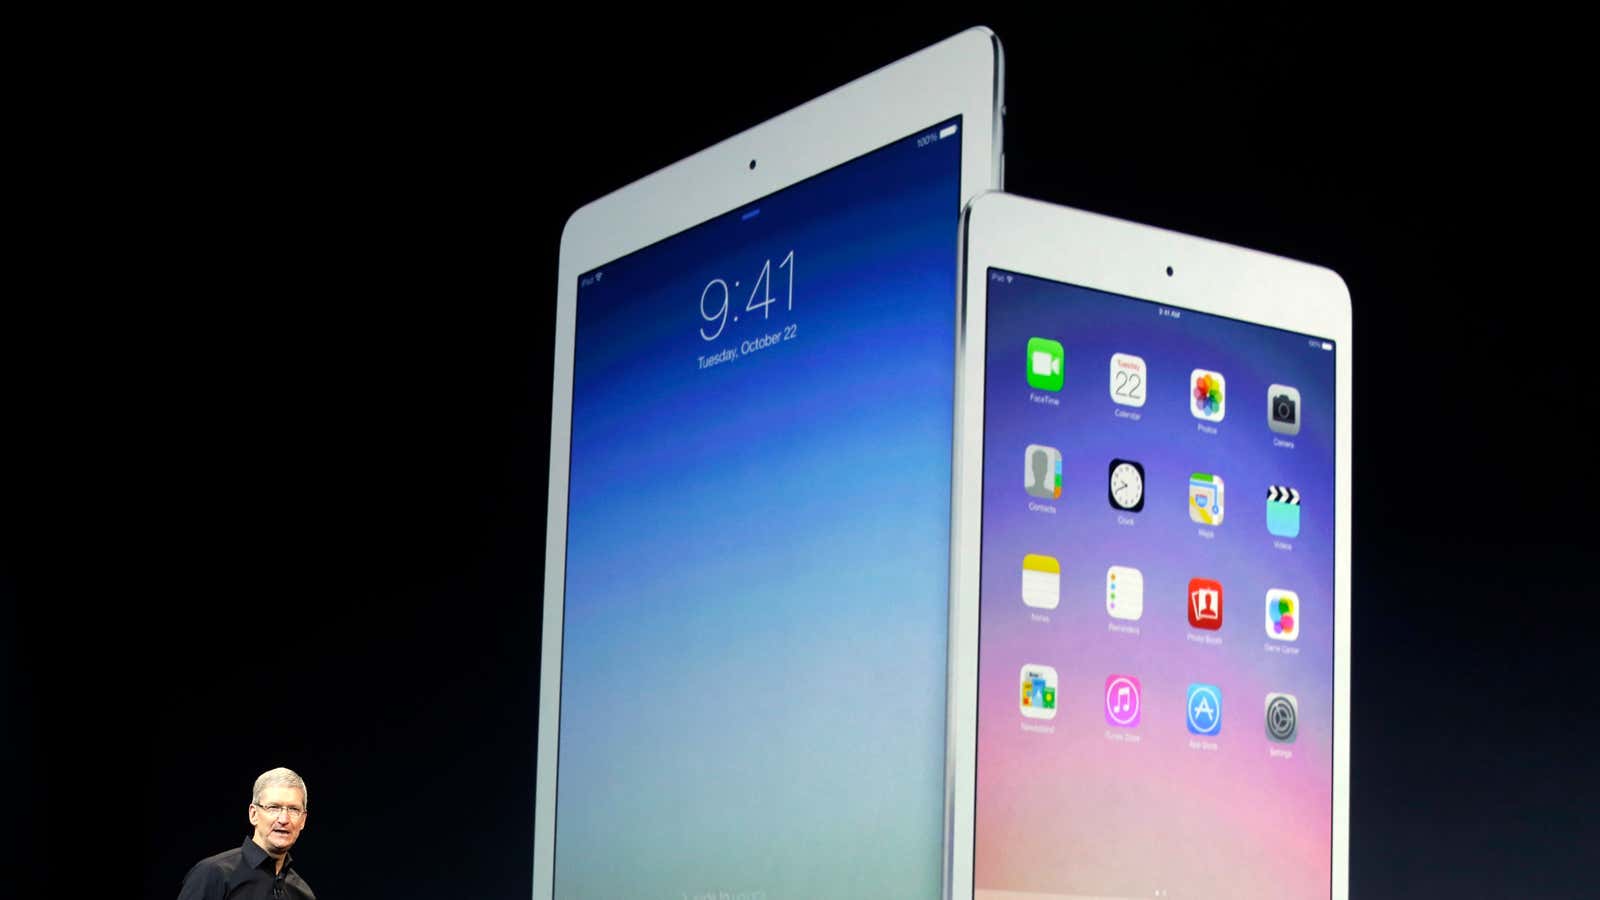 The only thing bigger than these iPads will be their sales this Christmas.